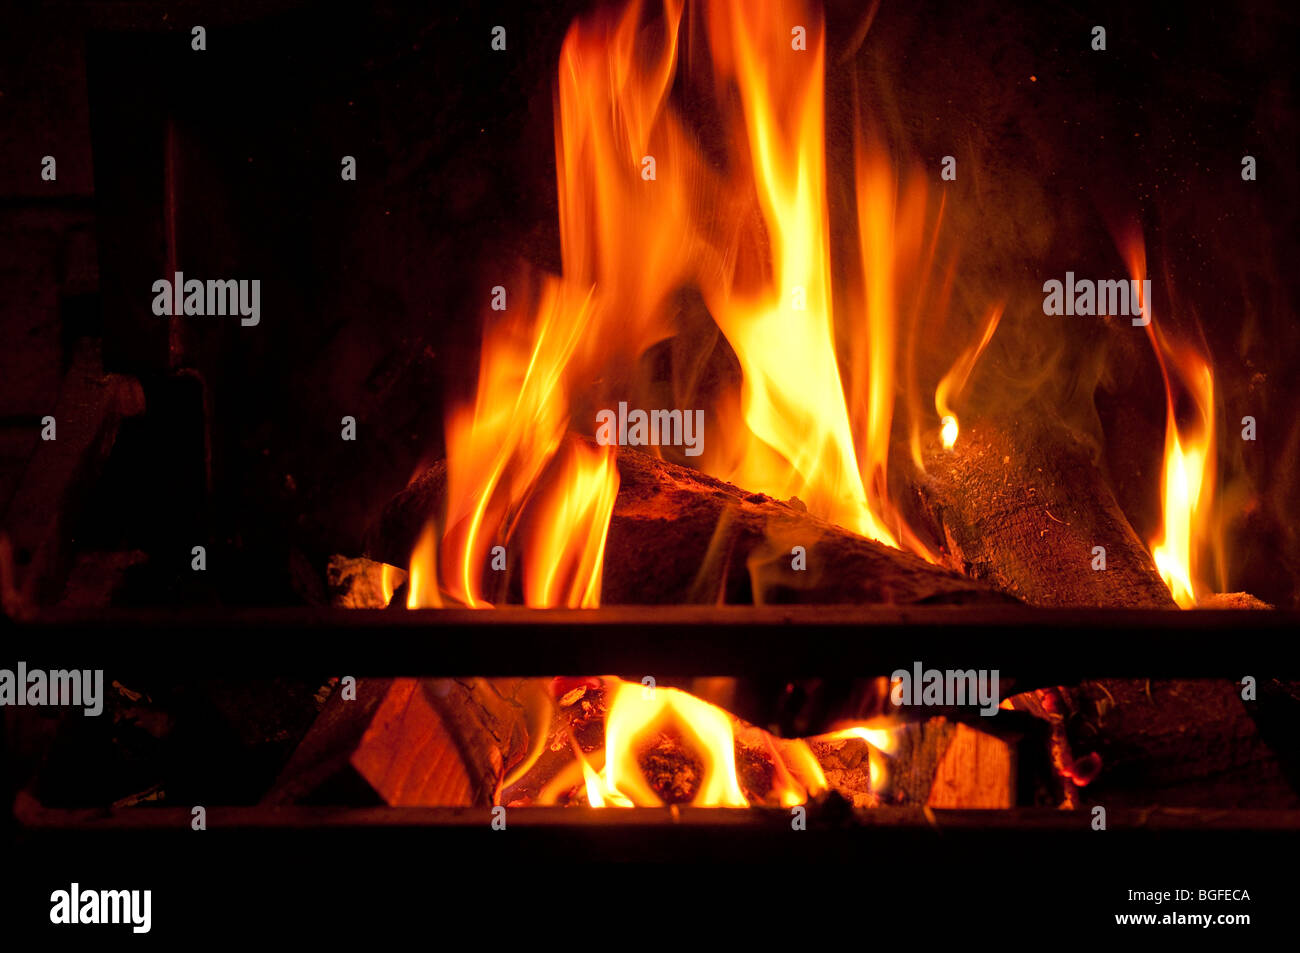 A log and coal fire burning fiercely - burning carbon / fossil fuels. Stock Photo